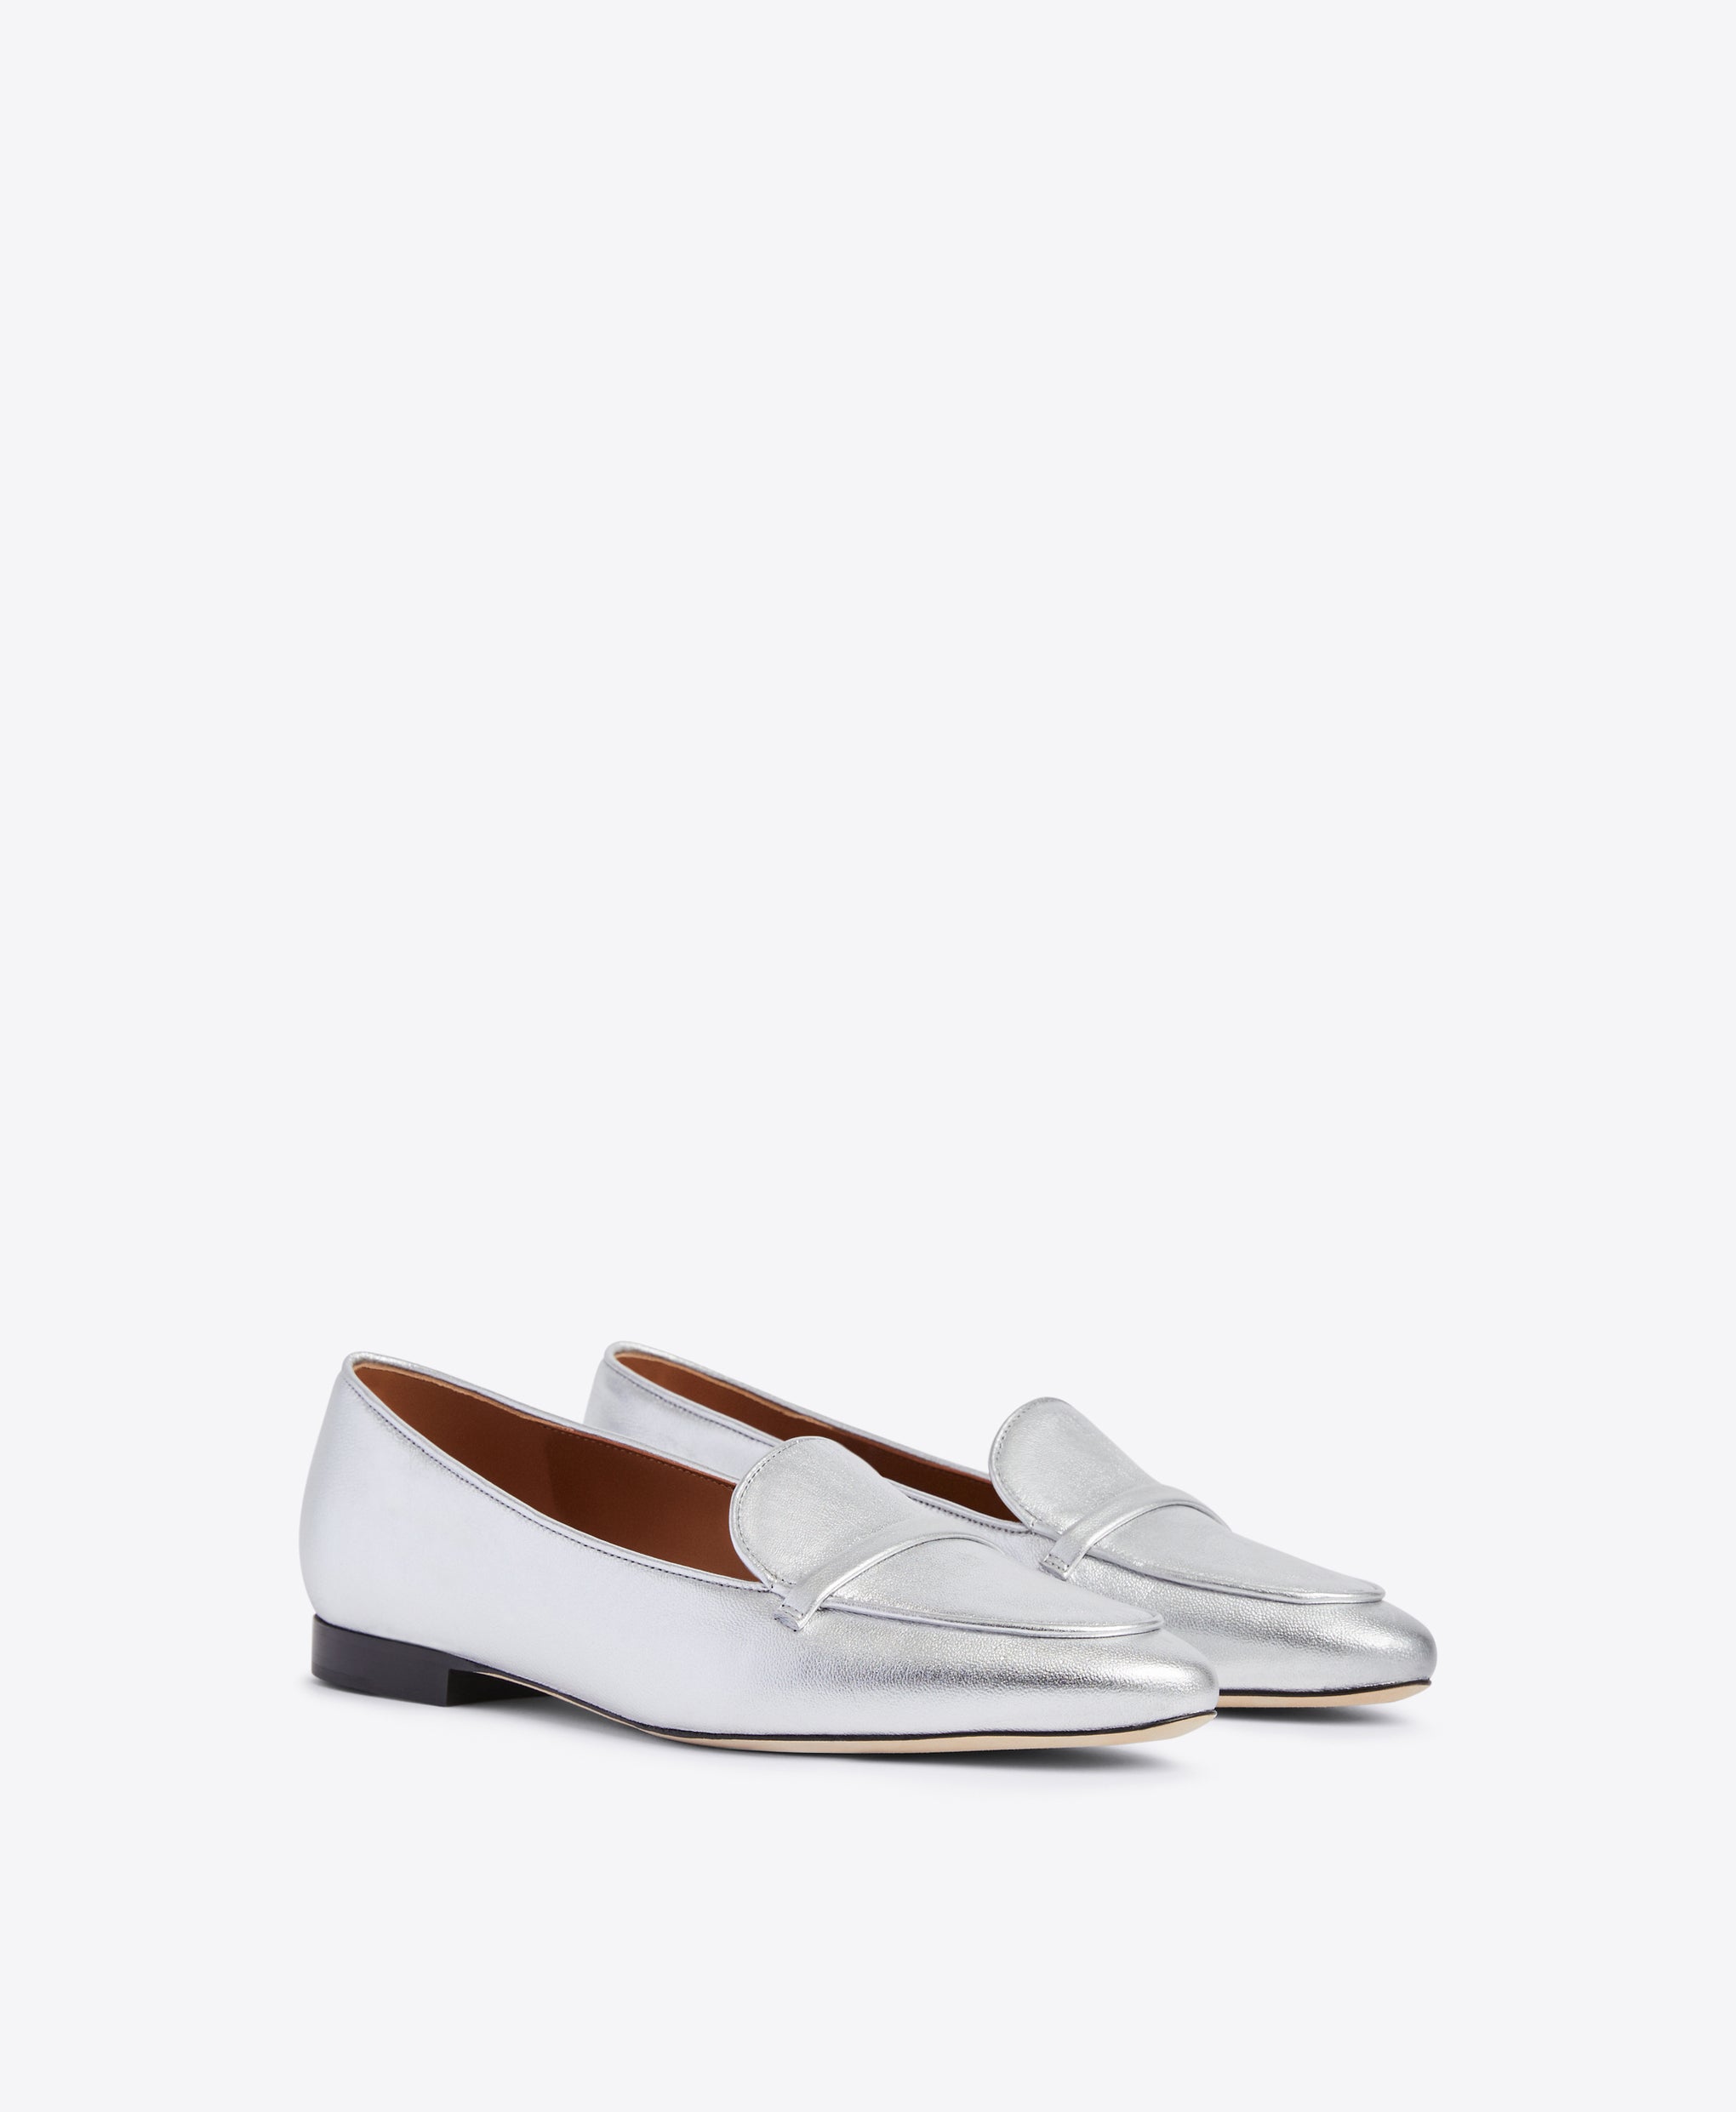 Silver Metallic Nappa Loafers - Elongated Almond Toe with Strap Detail on Monoblock | Malone Souliers